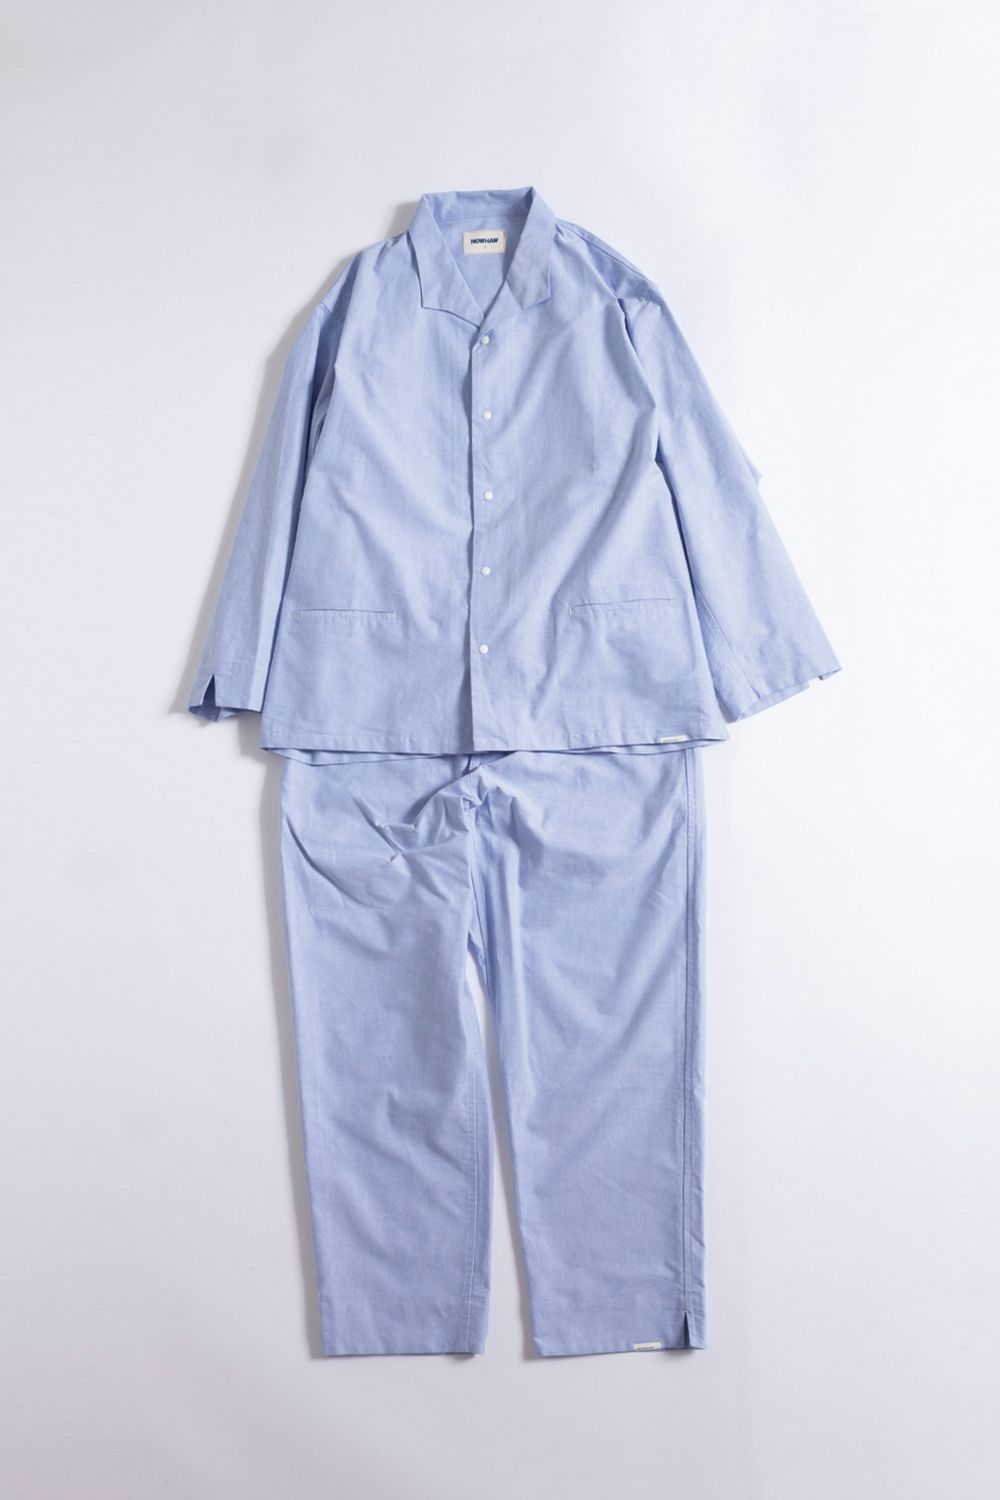 NOWHAW   ラスト1点"week"pajamaセットアップBLUE   Salty